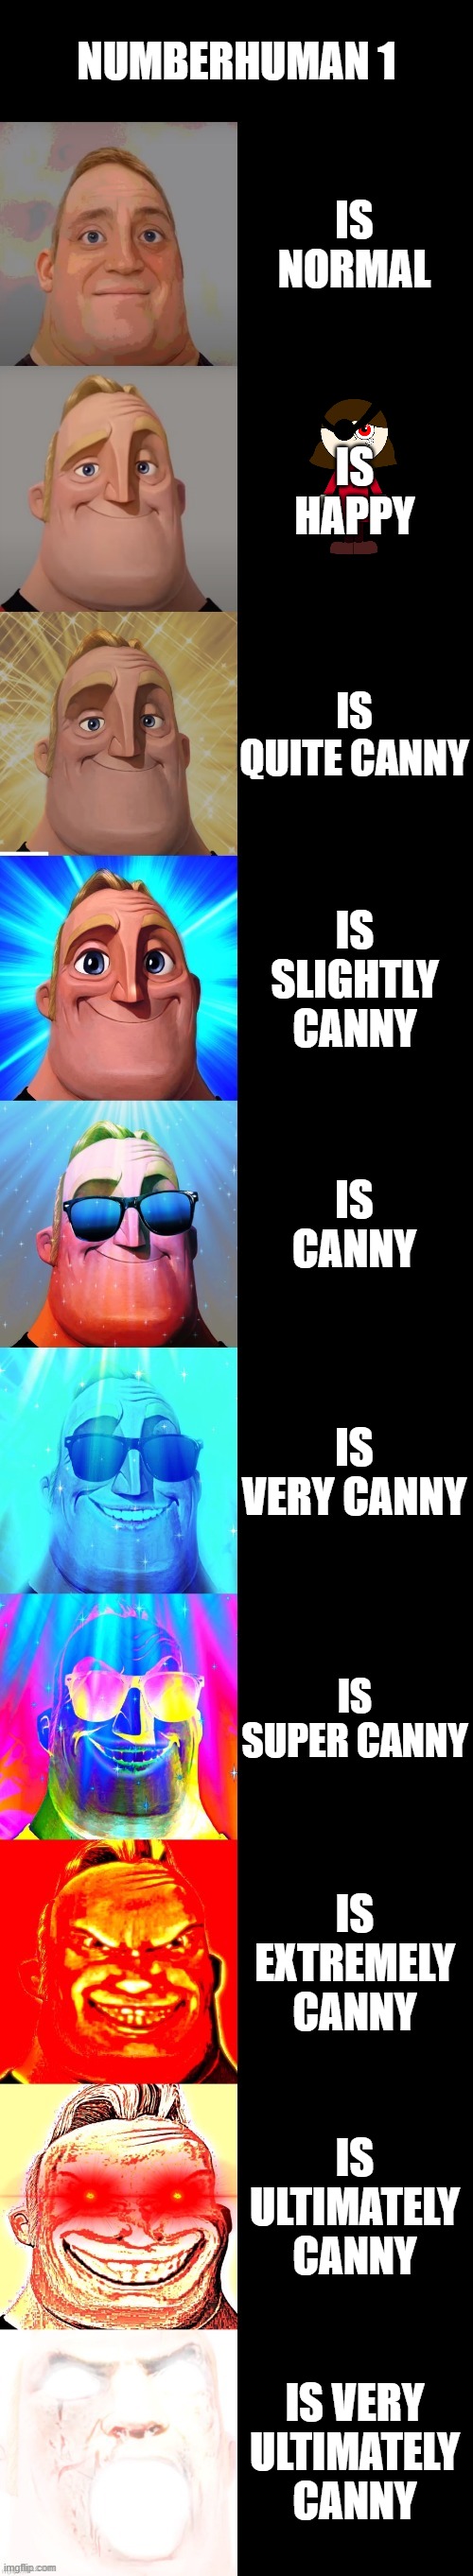 Mr. Incredible Becoming Canny(Numberhuman 1) | NUMBERHUMAN 1; IS NORMAL; IS HAPPY; IS QUITE CANNY; IS SLIGHTLY CANNY; IS CANNY; IS VERY CANNY; IS SUPER CANNY; IS EXTREMELY CANNY; IS ULTIMATELY CANNY; IS VERY ULTIMATELY CANNY | image tagged in mr incredible becoming canny | made w/ Imgflip meme maker